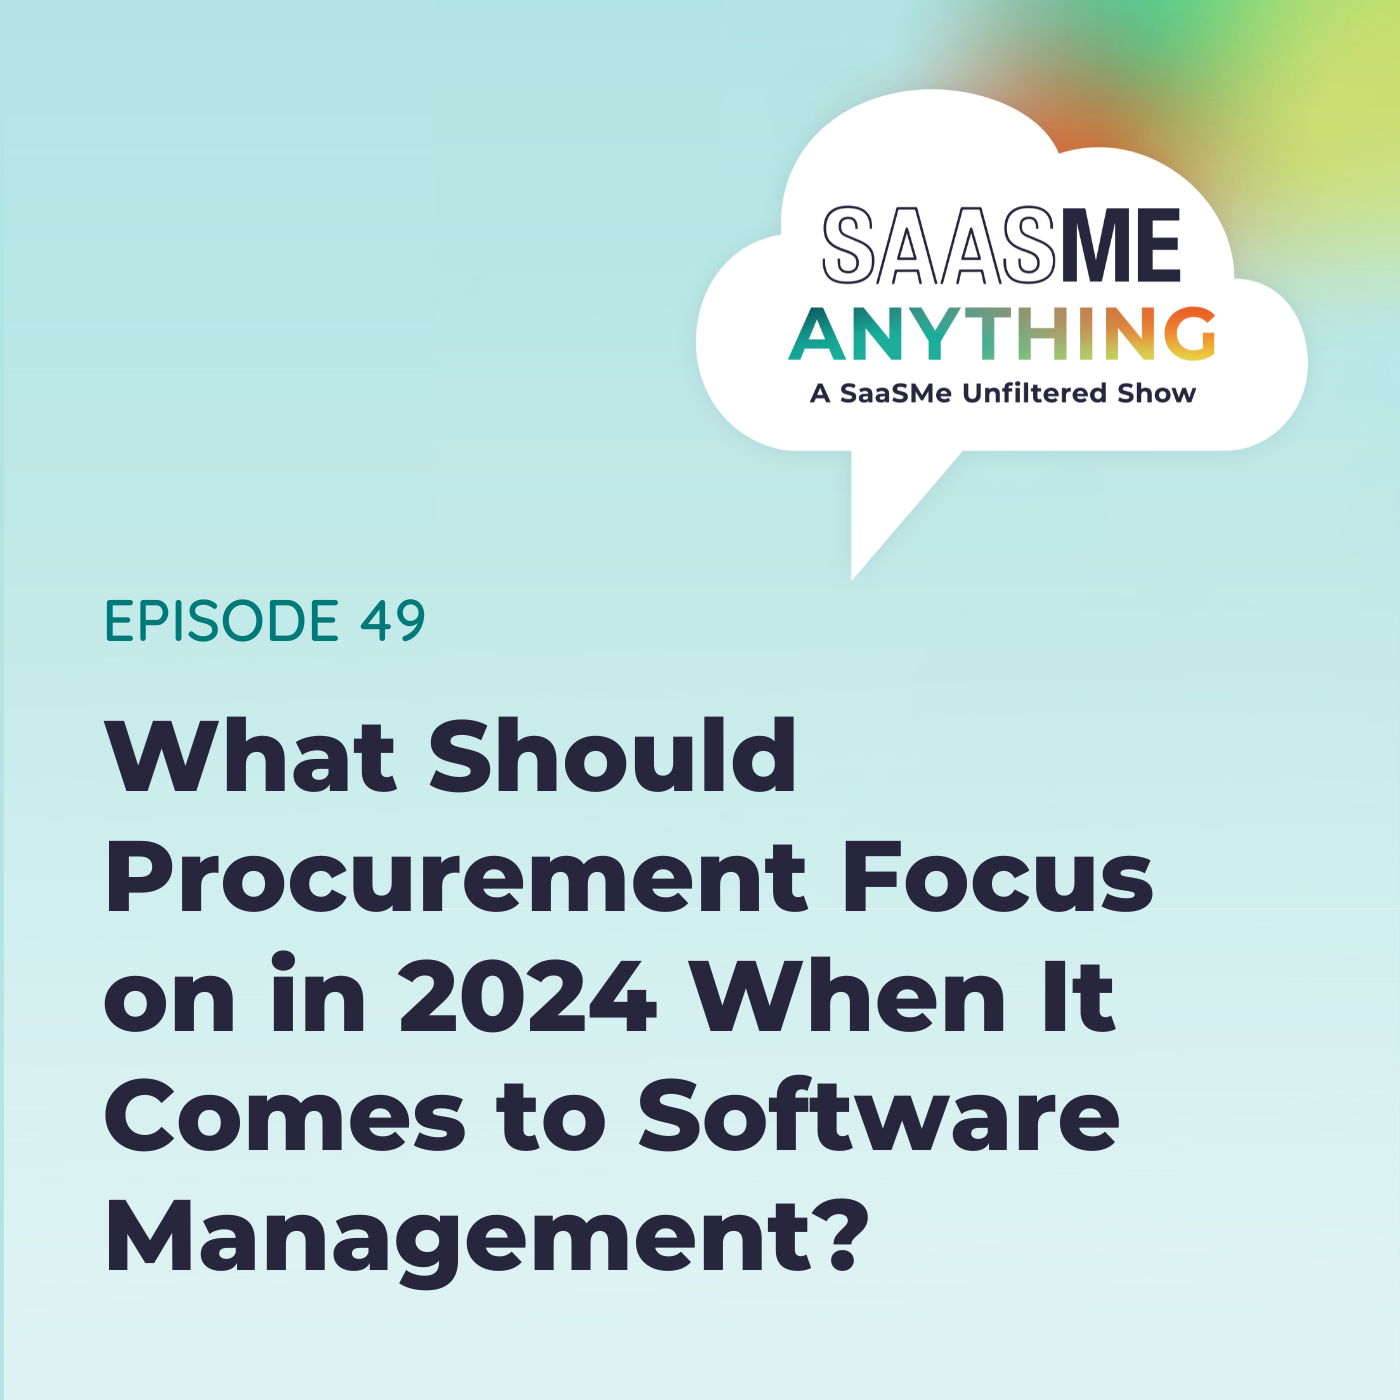 What Should Procurement Focus on in 2024 When It Comes to Software Management?